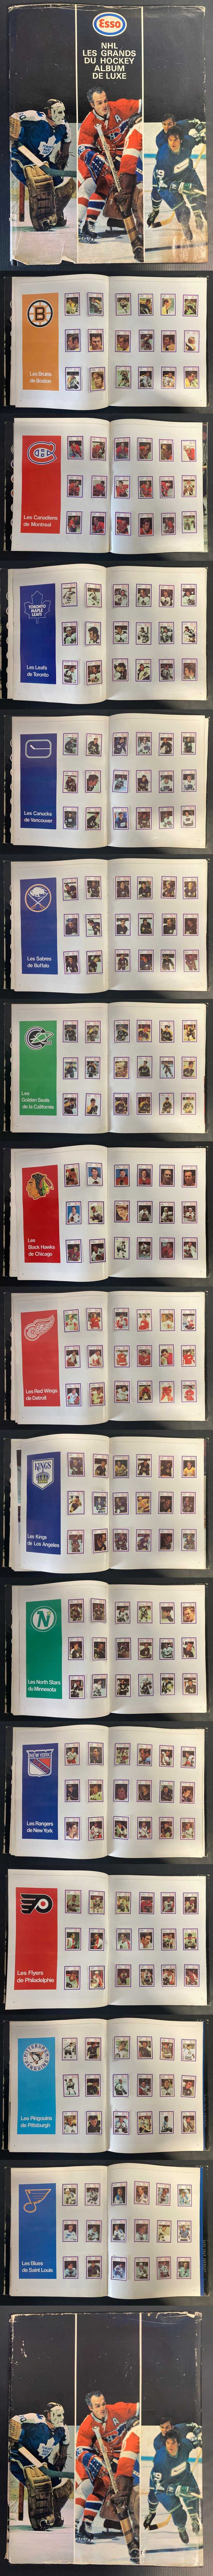 1970-71 ESSO NHL POWER PLAYER STICKERS FULL SET 252/252 IN ALBUM photo